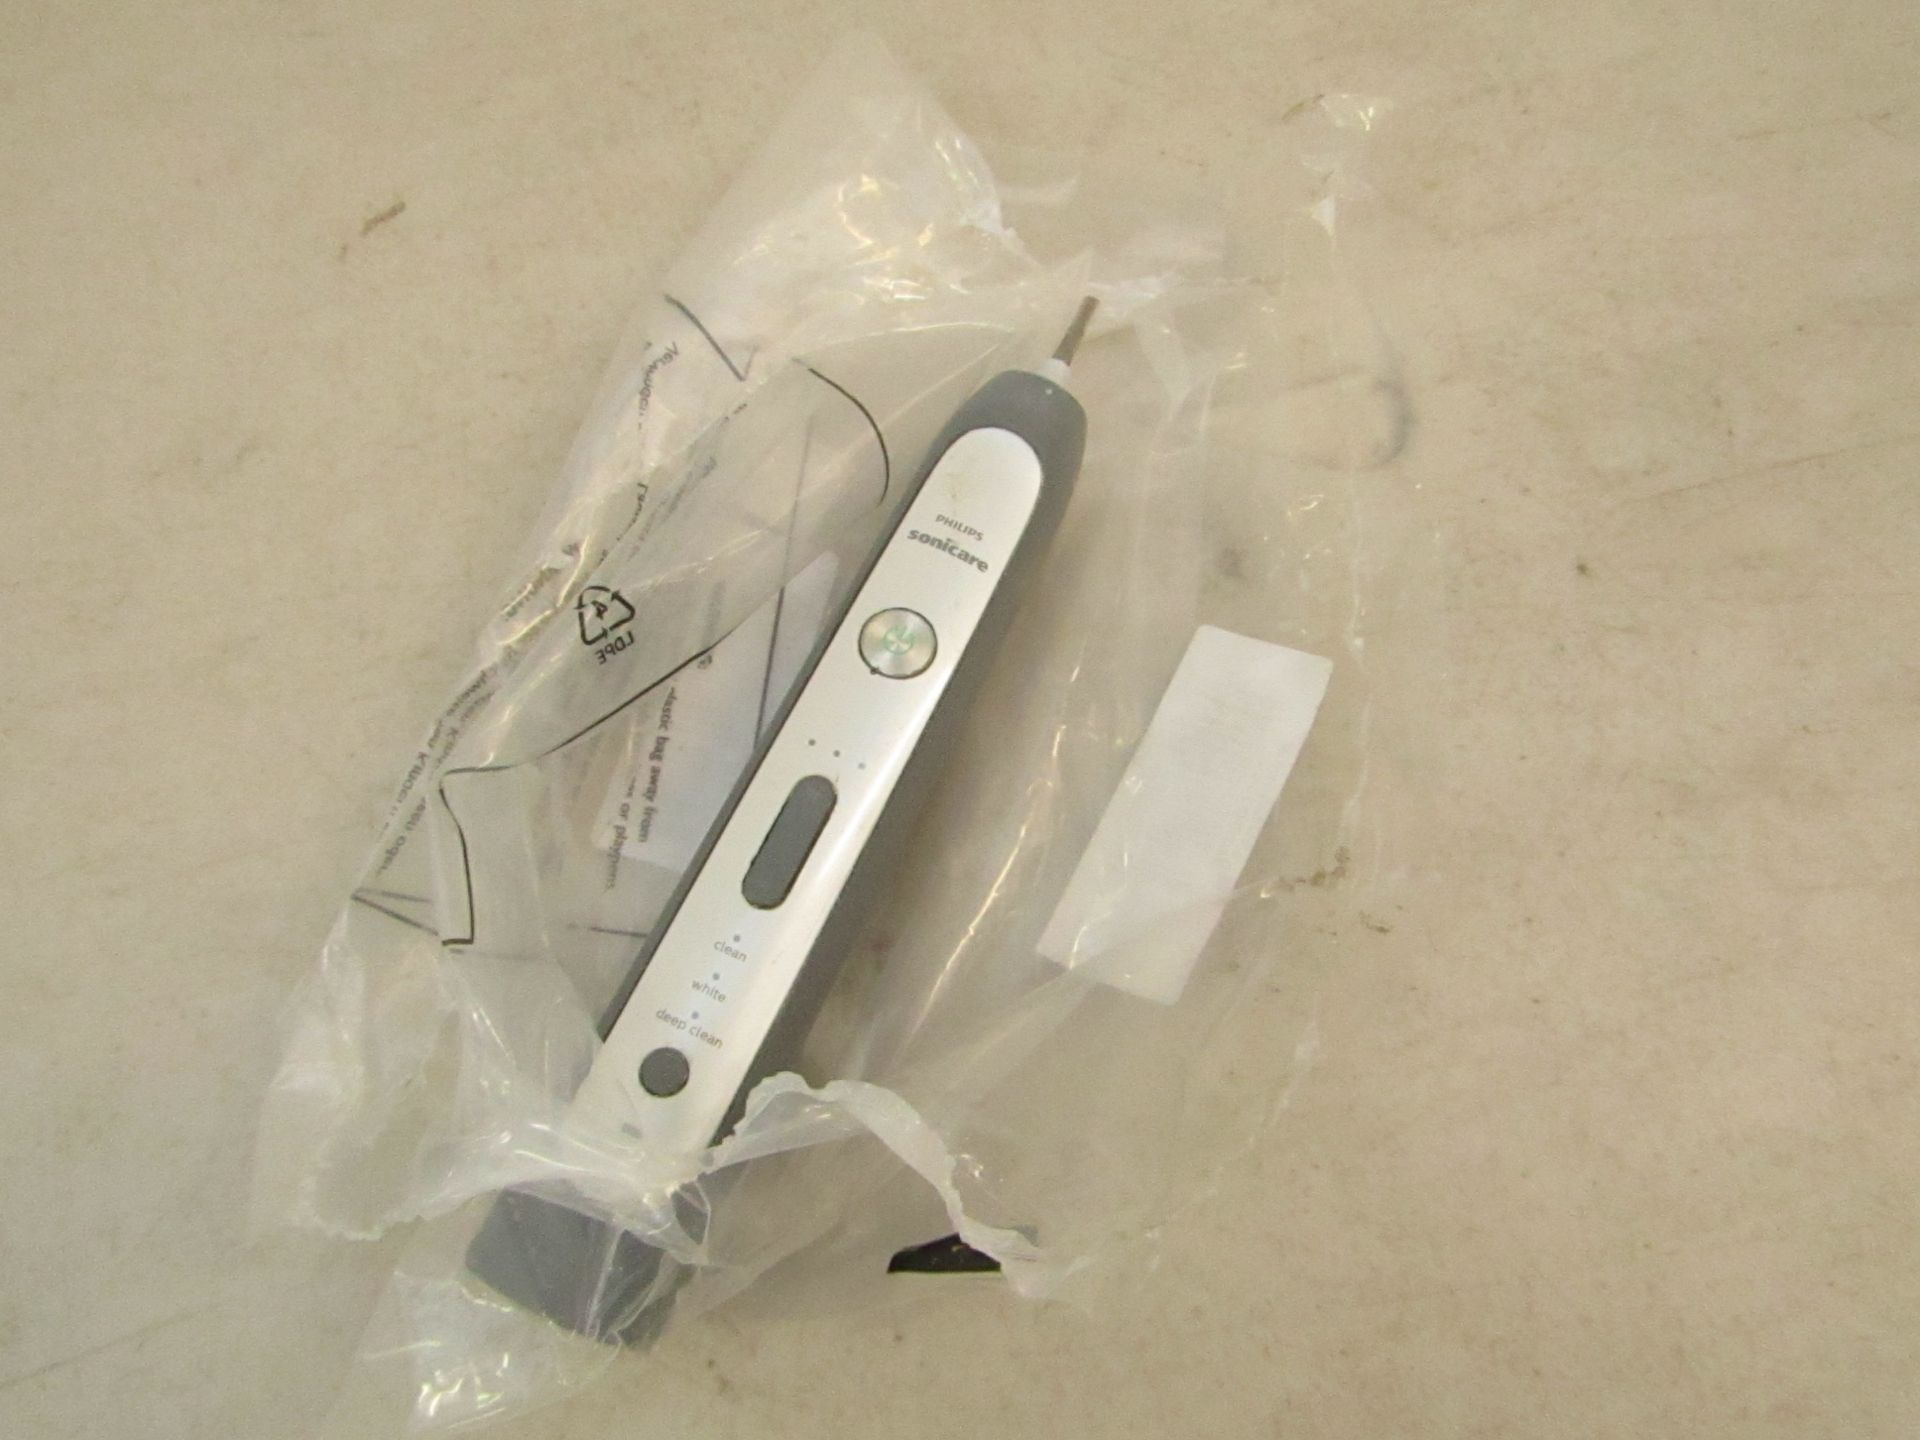 Phillips sonicare electric toothbrush, no heads with it but turns on.